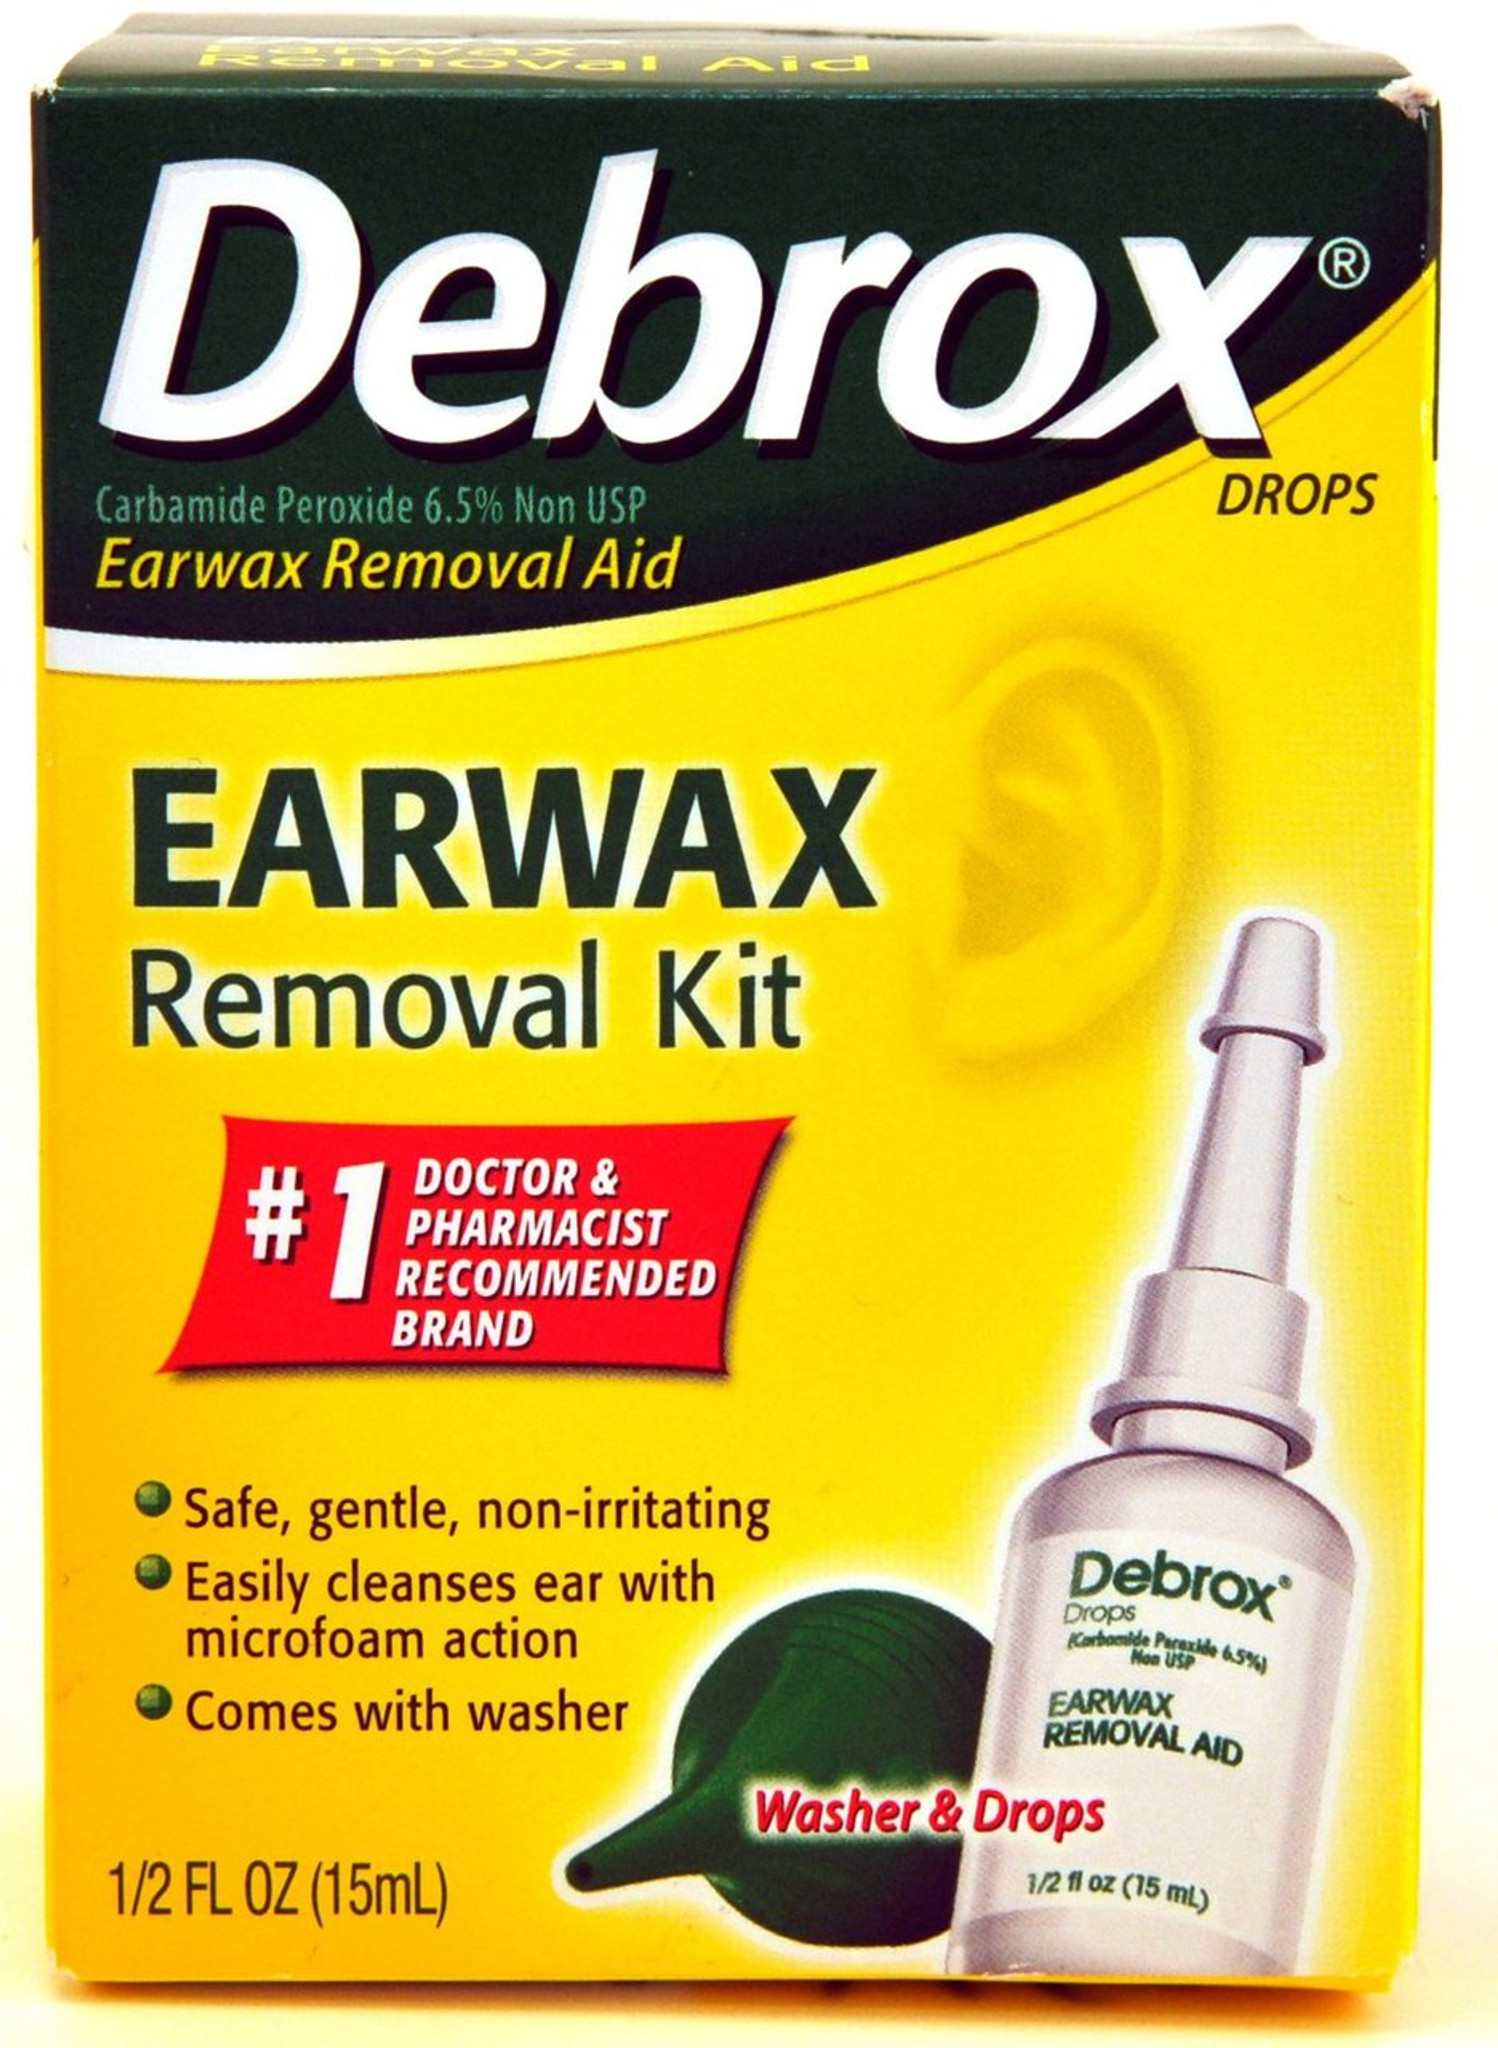 Debrox Earwax Removal Kit (Drops and Ear Syringe Bulb) - User Review 